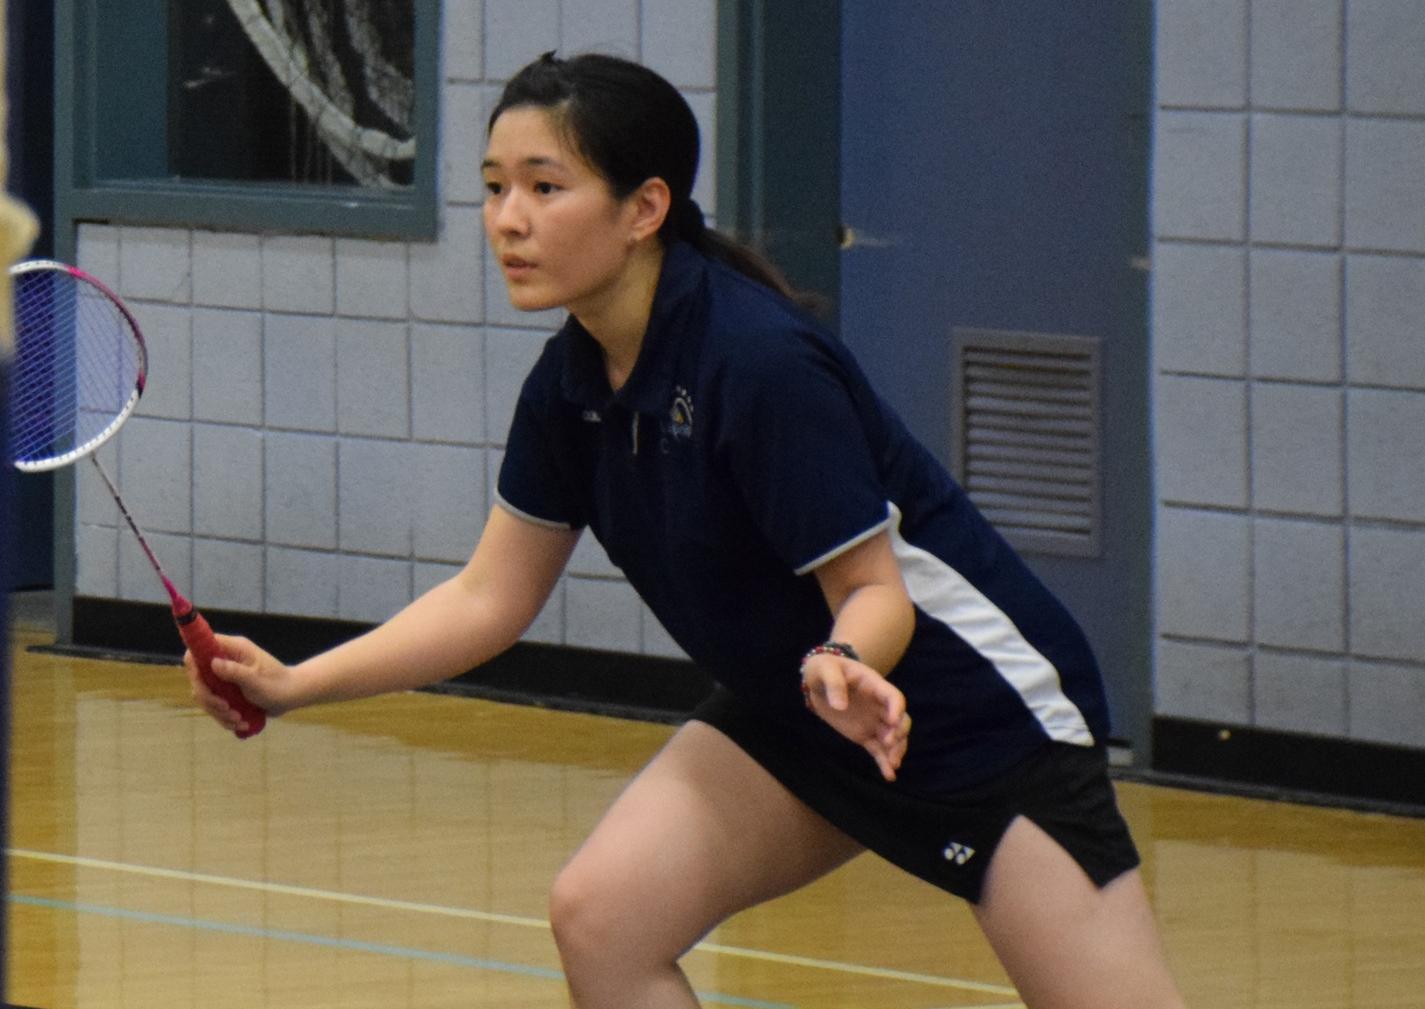 Women's badminton team continues to roll in conference